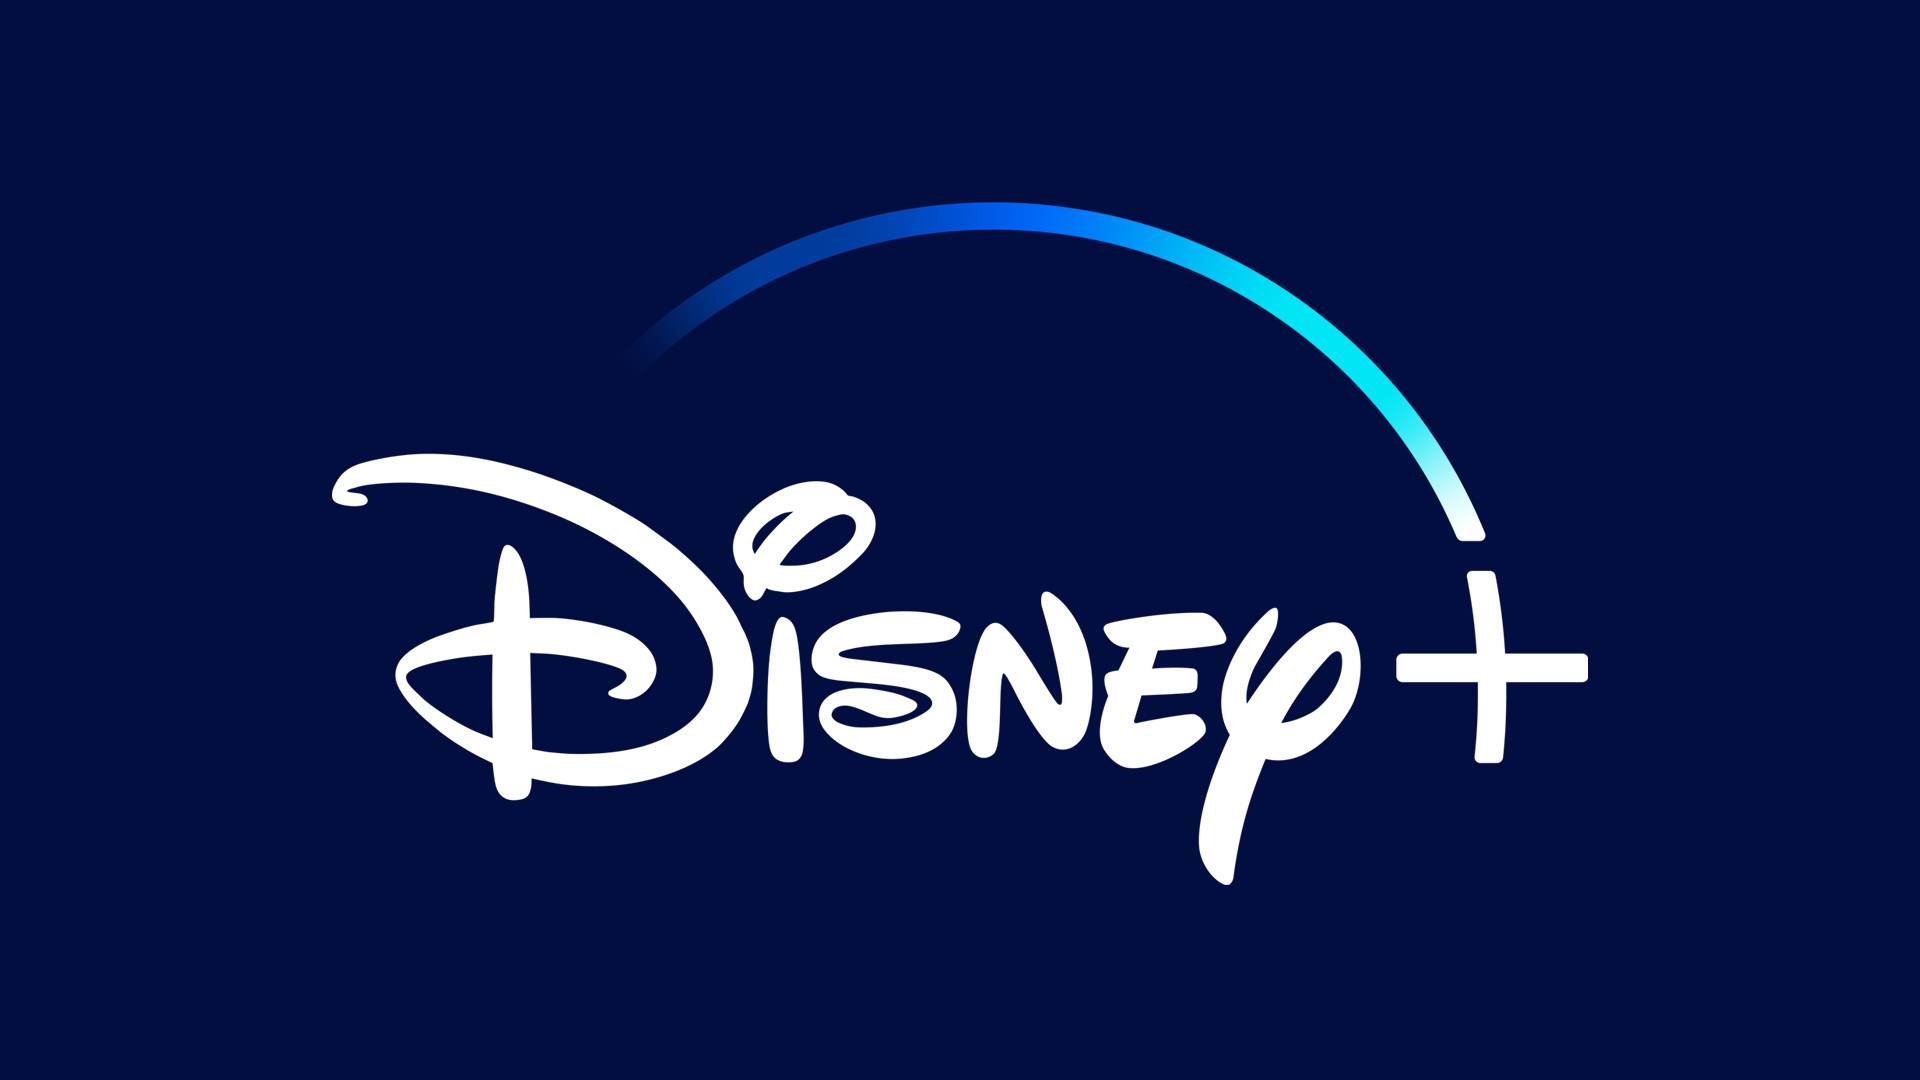 New video highlights what's ahead on Disney+ in 2023